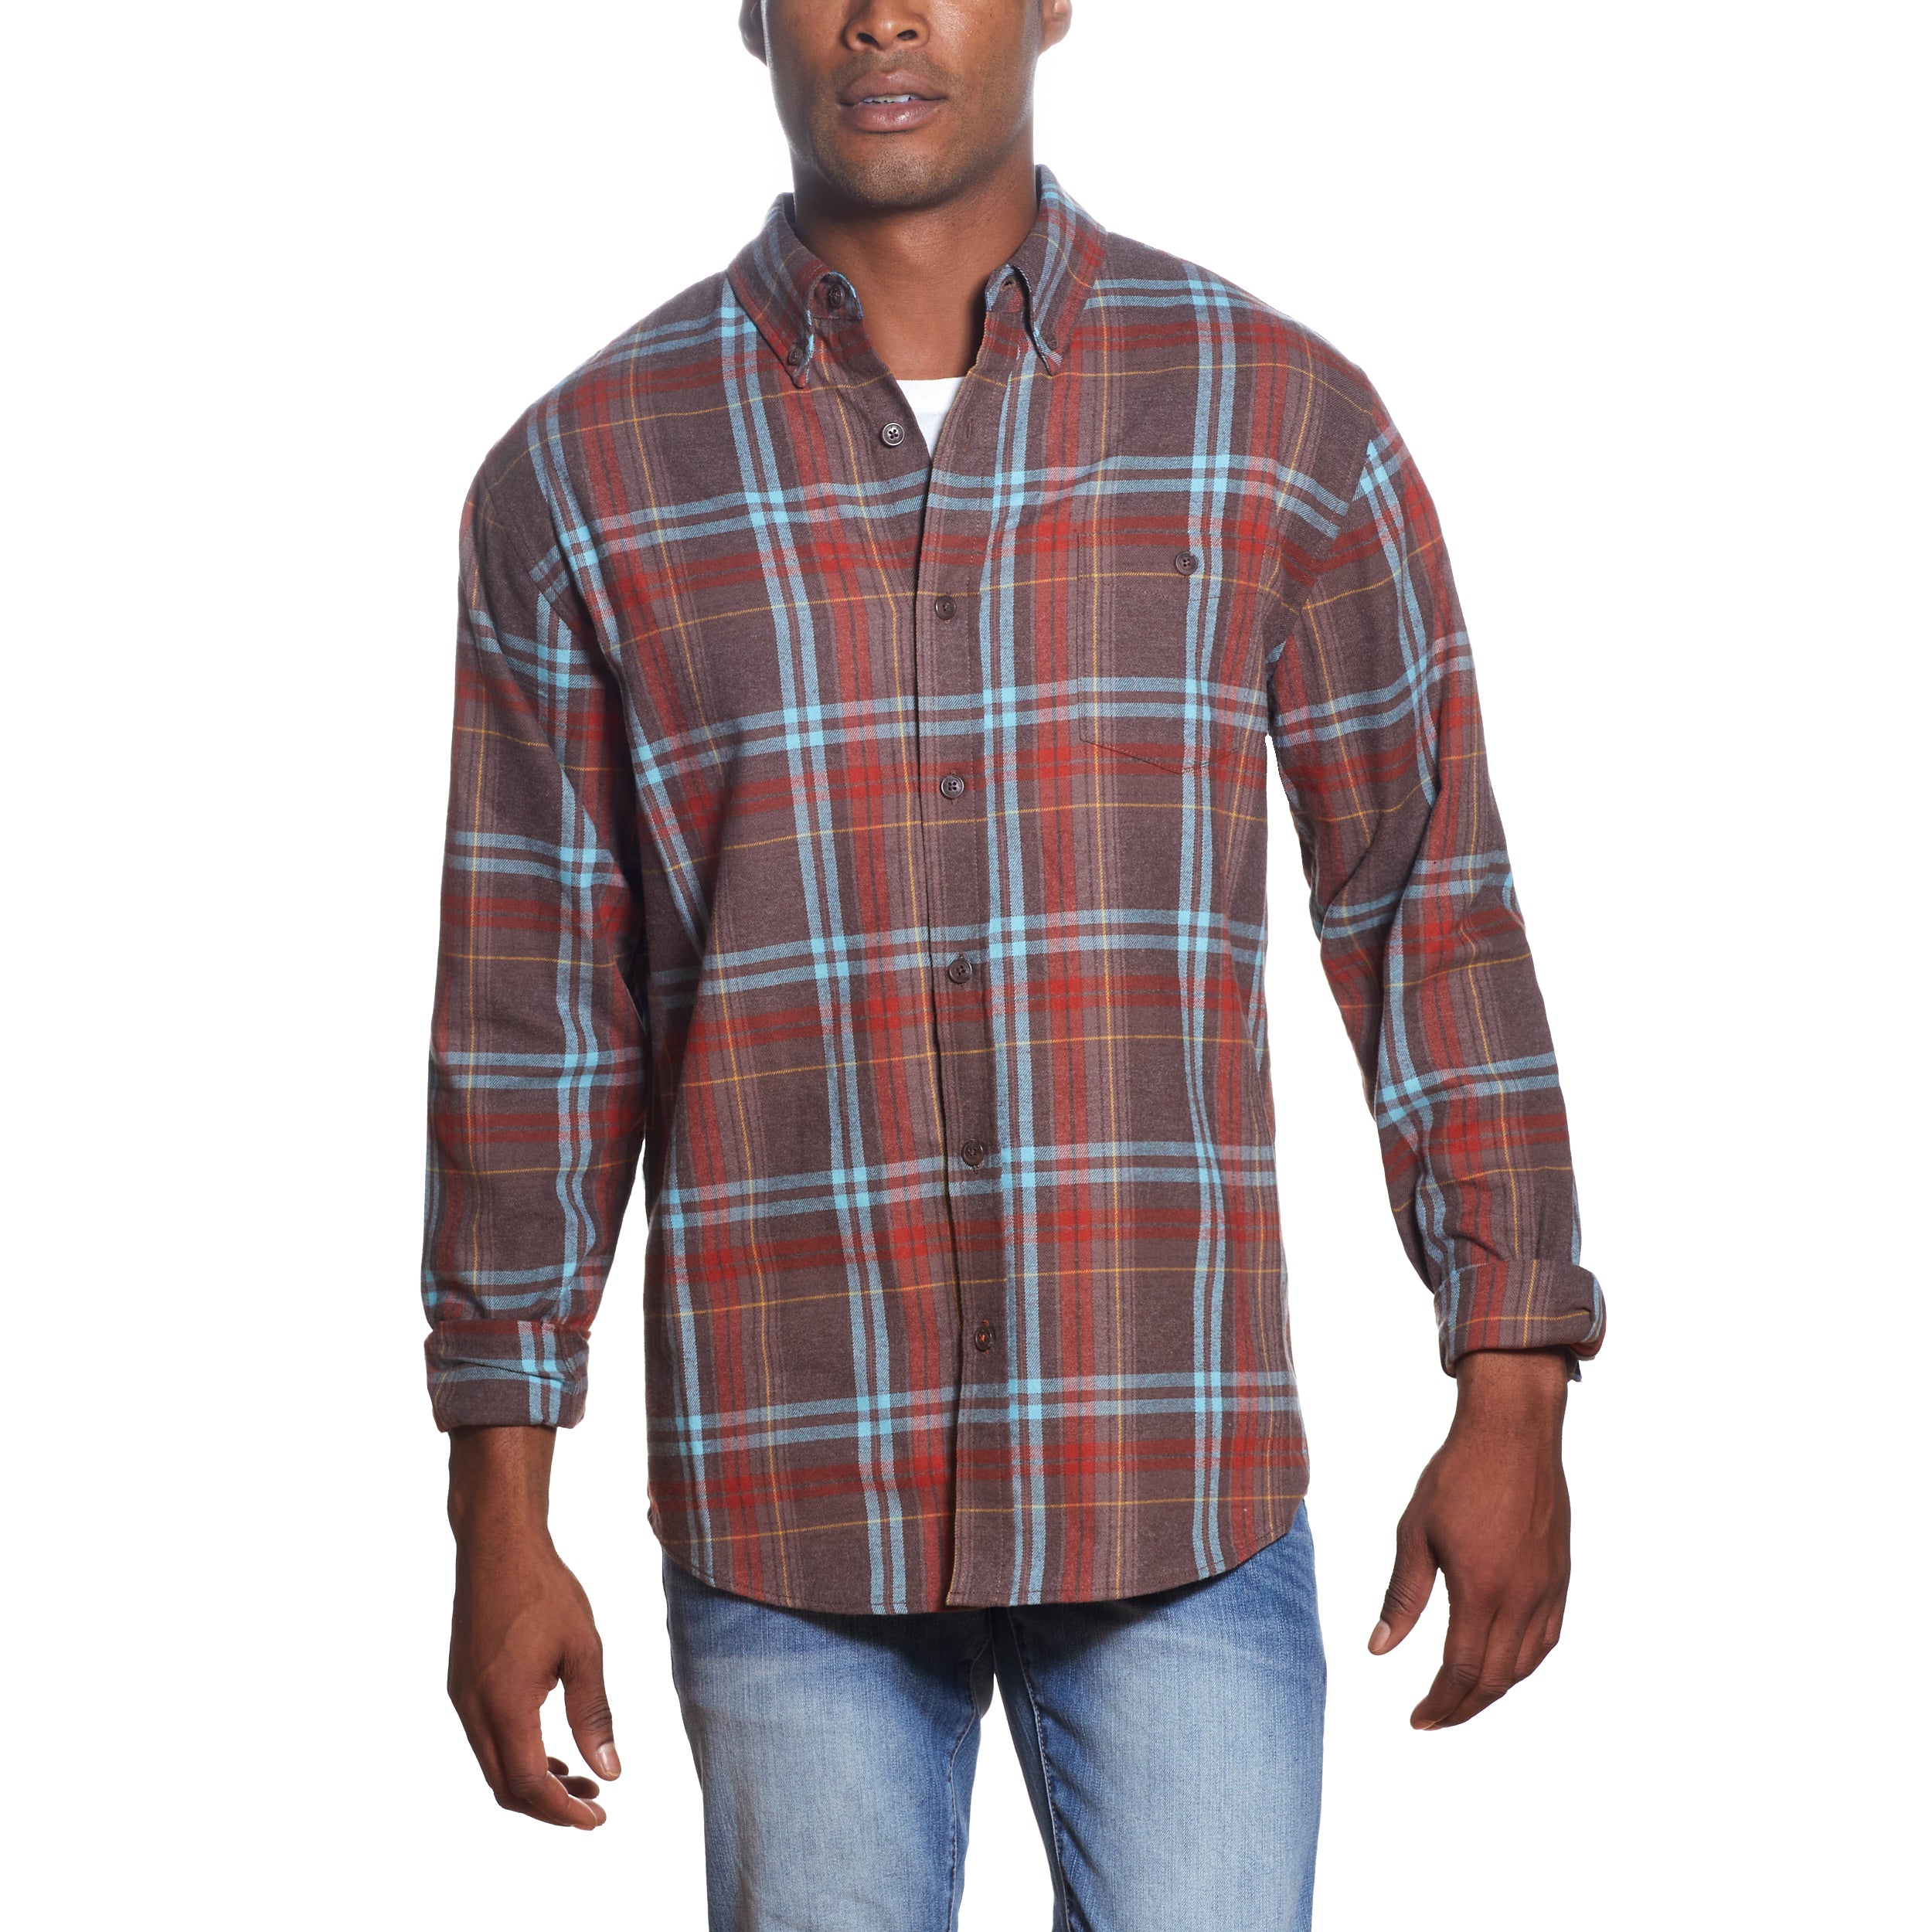 Long Sleeve ANTIQUE PLAID flannel IN SEPIA TINT